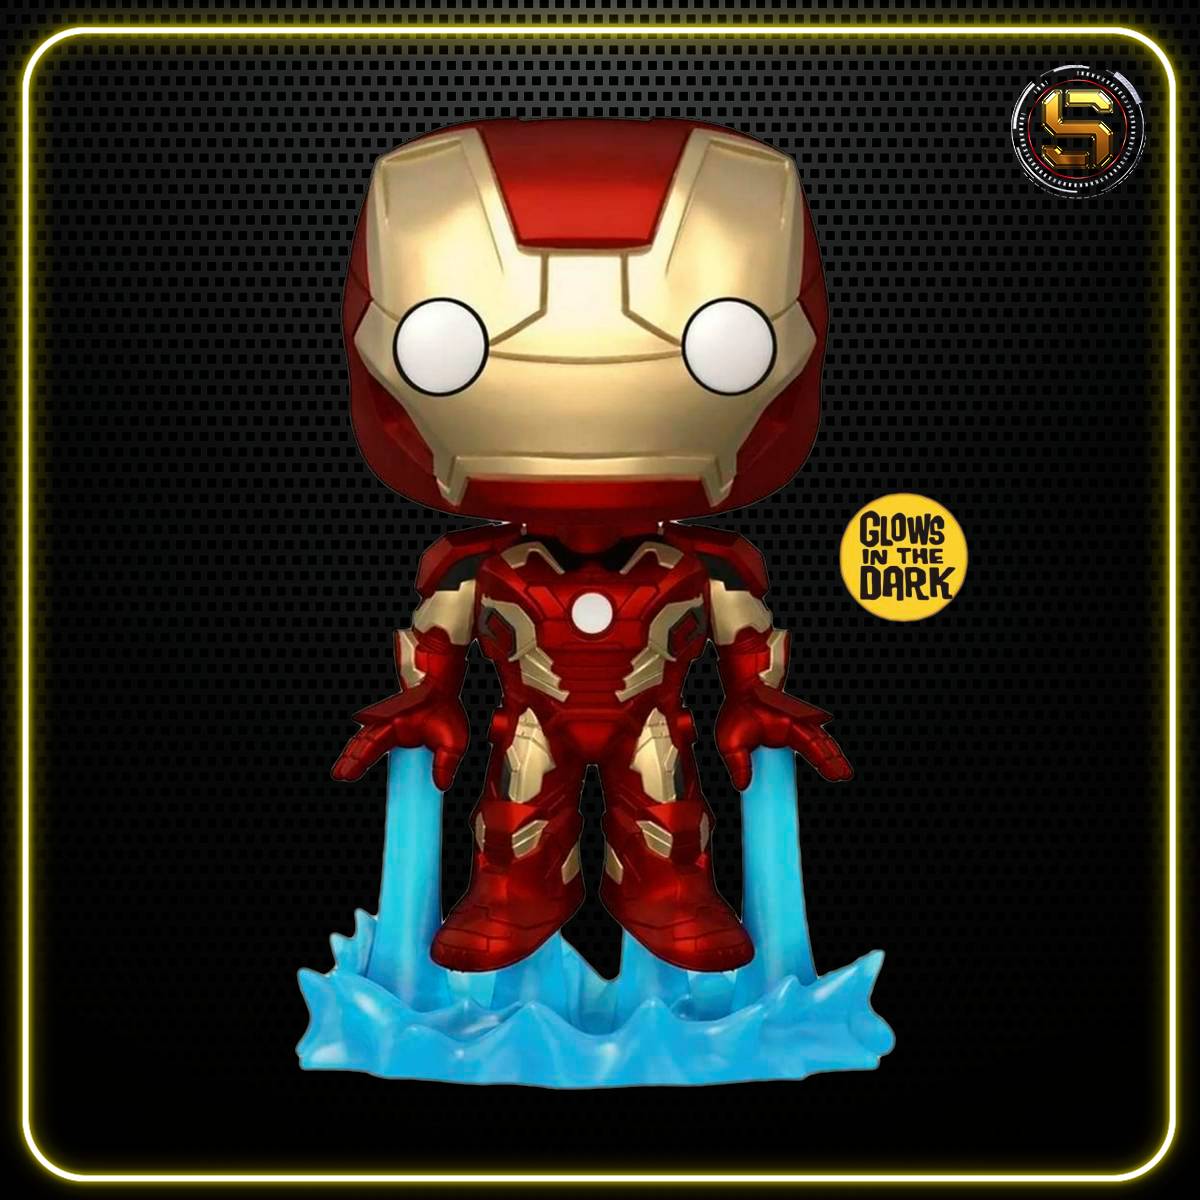 Iron Man Mark 43 (10-Inch Jumbo)(Glow in the Dark) Avengers Age of Ultron  Marvel Funko Pop 962 Special Edition Exclusive